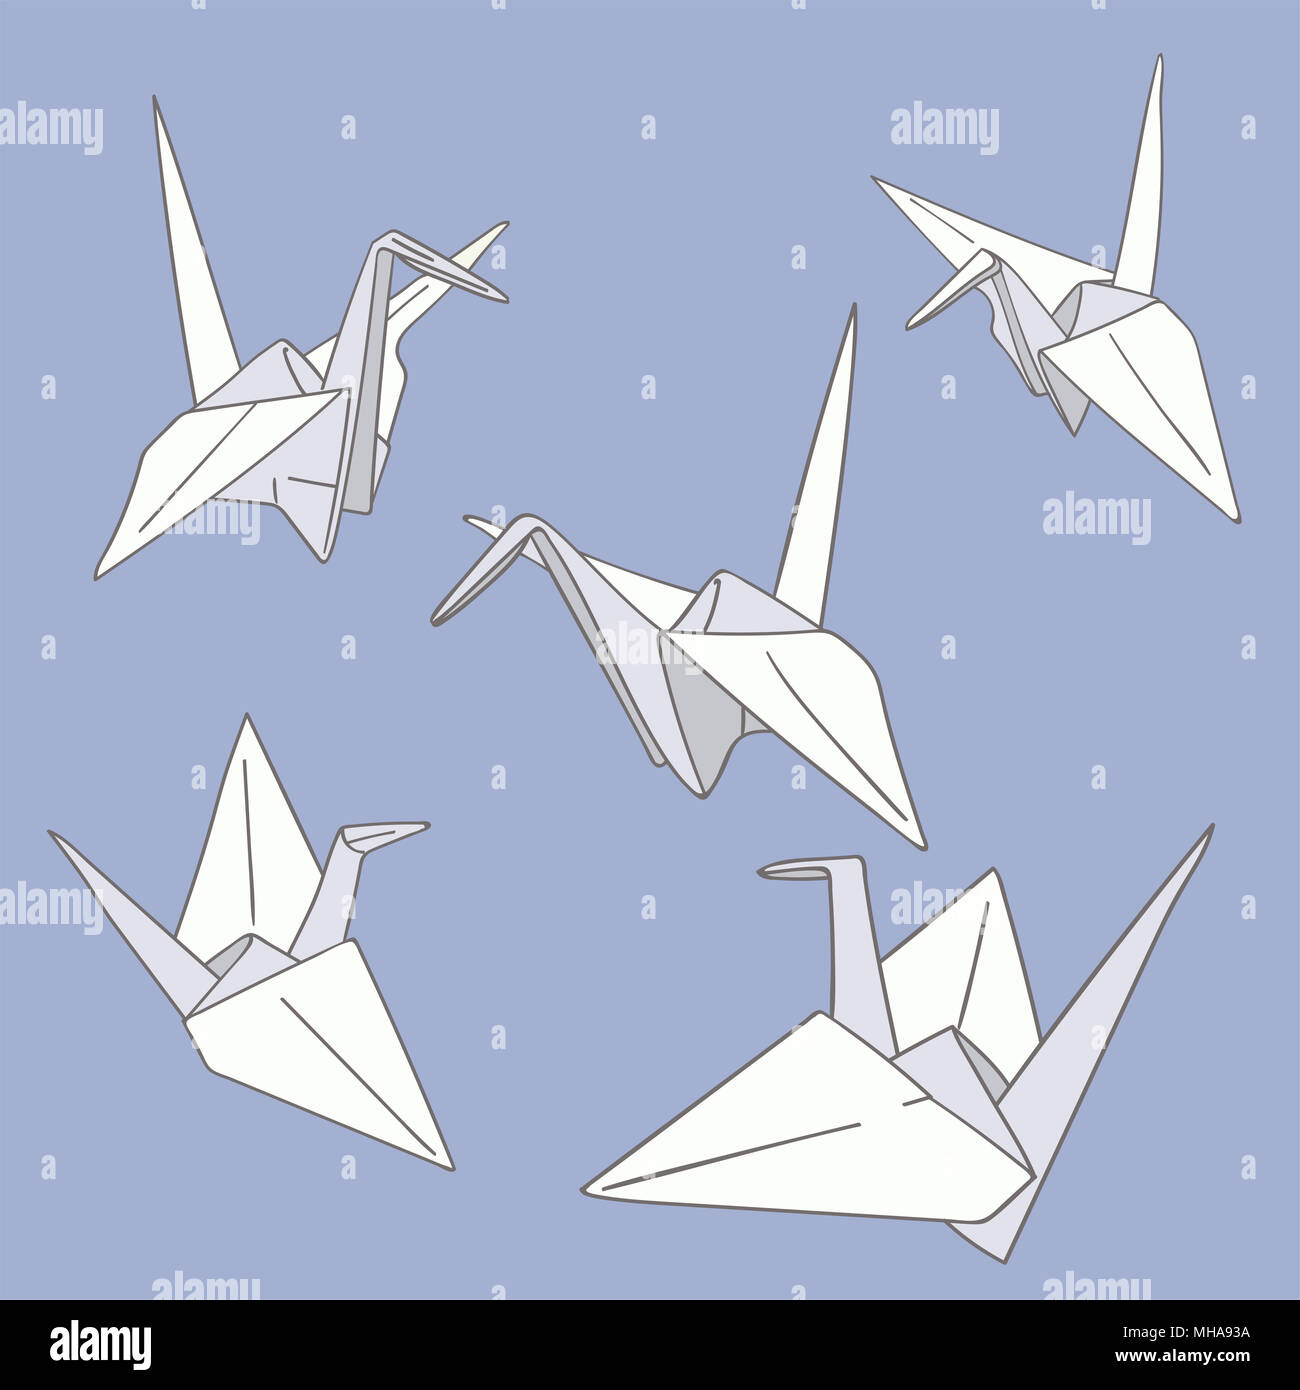 Set of hand drawn  Japanese paper craft origami birds isolated on blue background Stock Photo